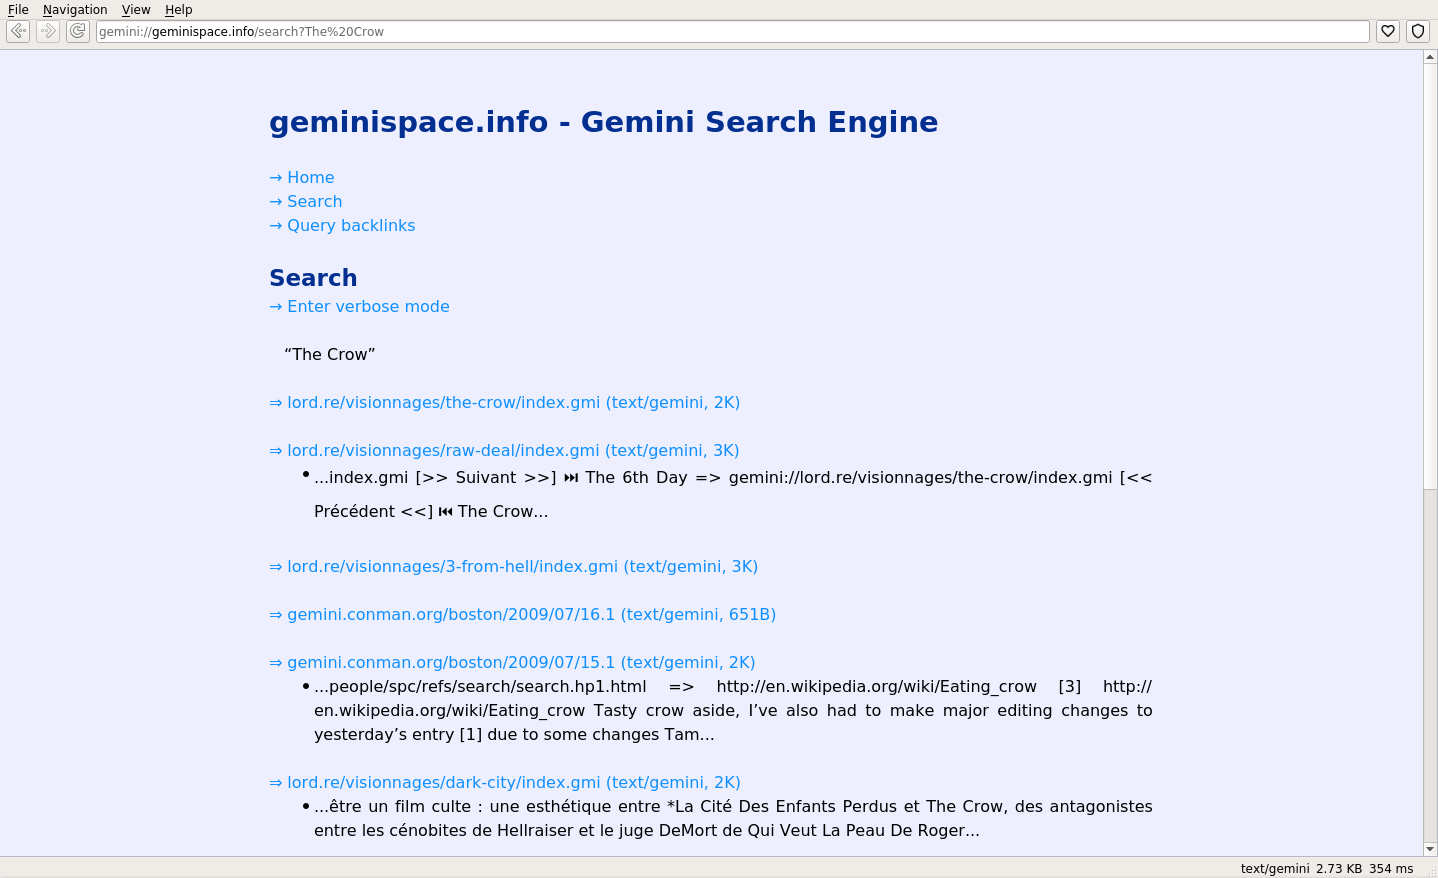 Search results for "The Crow" on geminispace.info